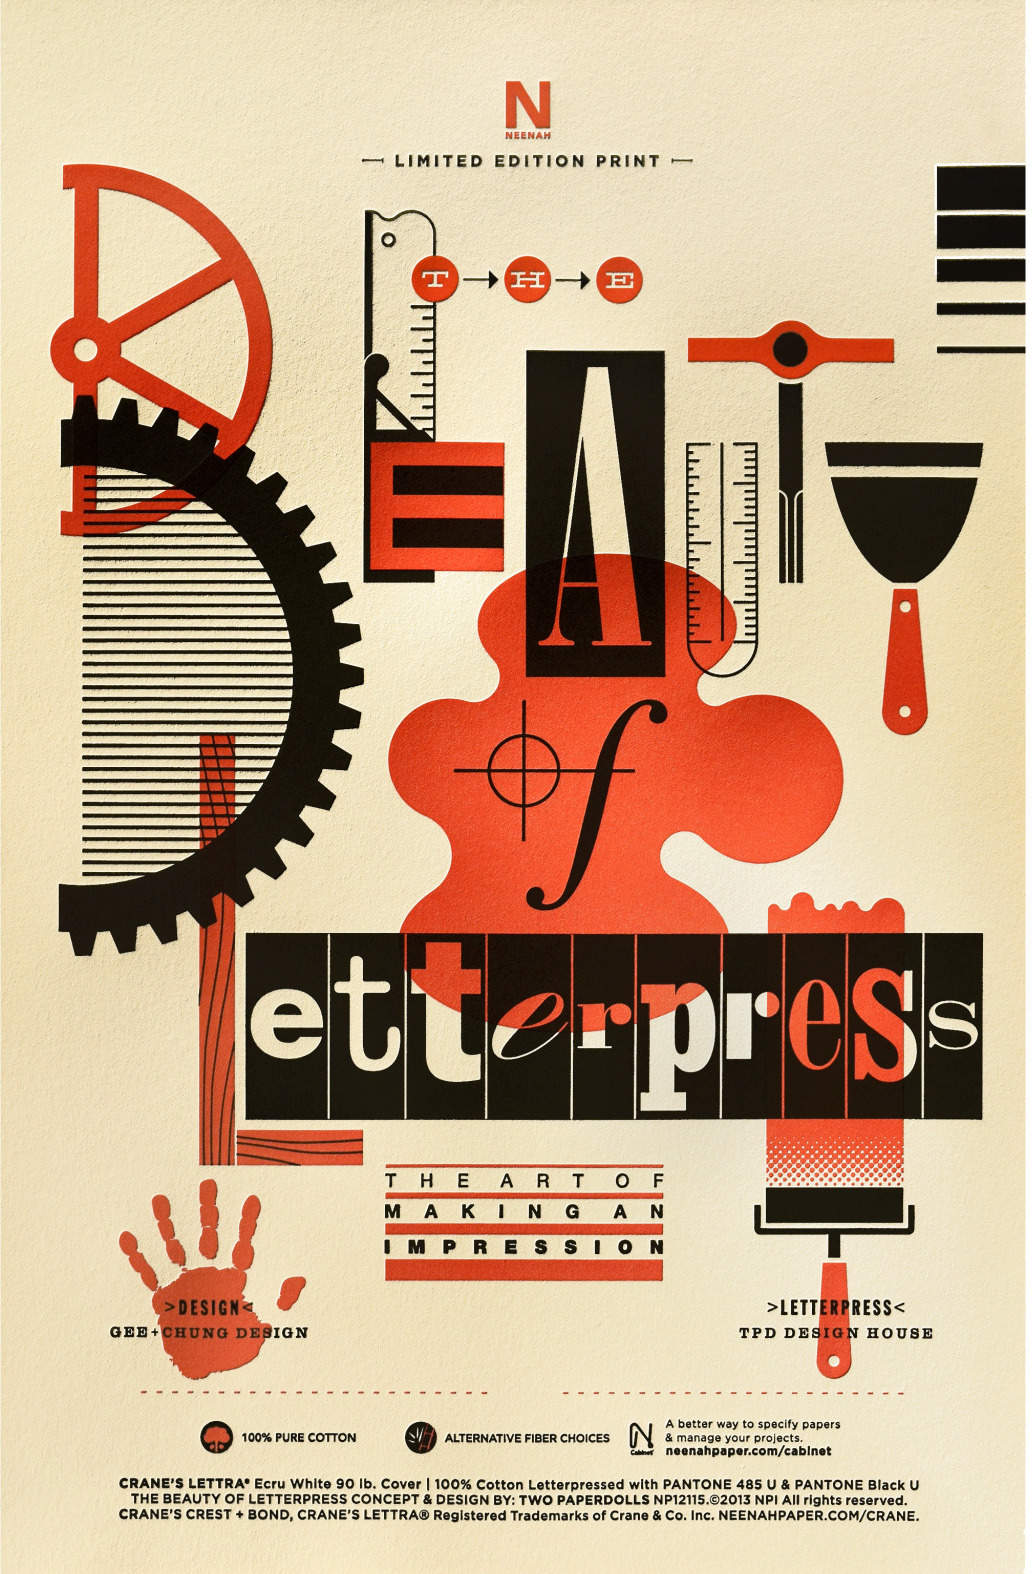 Edition #13 of “The Beauty of Letterpress: The Art of Making an Impression”, Earl Gee 2006 (background; image via Type Worship)